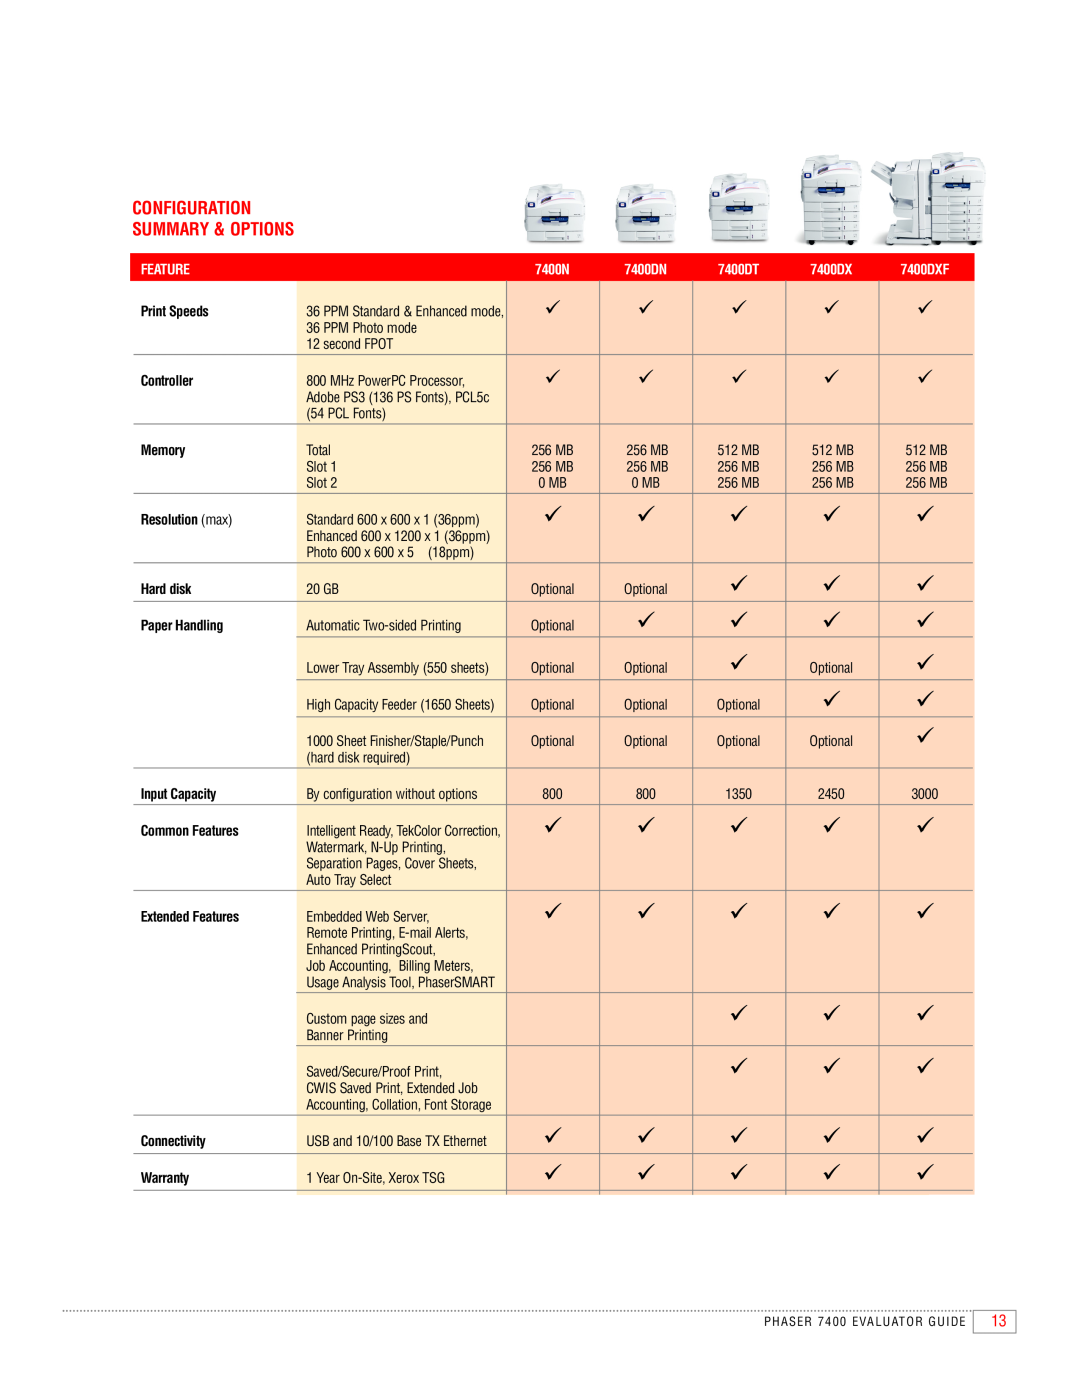 Xerox manual Configuration Summary & Options, Feature, 7400N, 7400DN, 7400DT, 7400DXF 